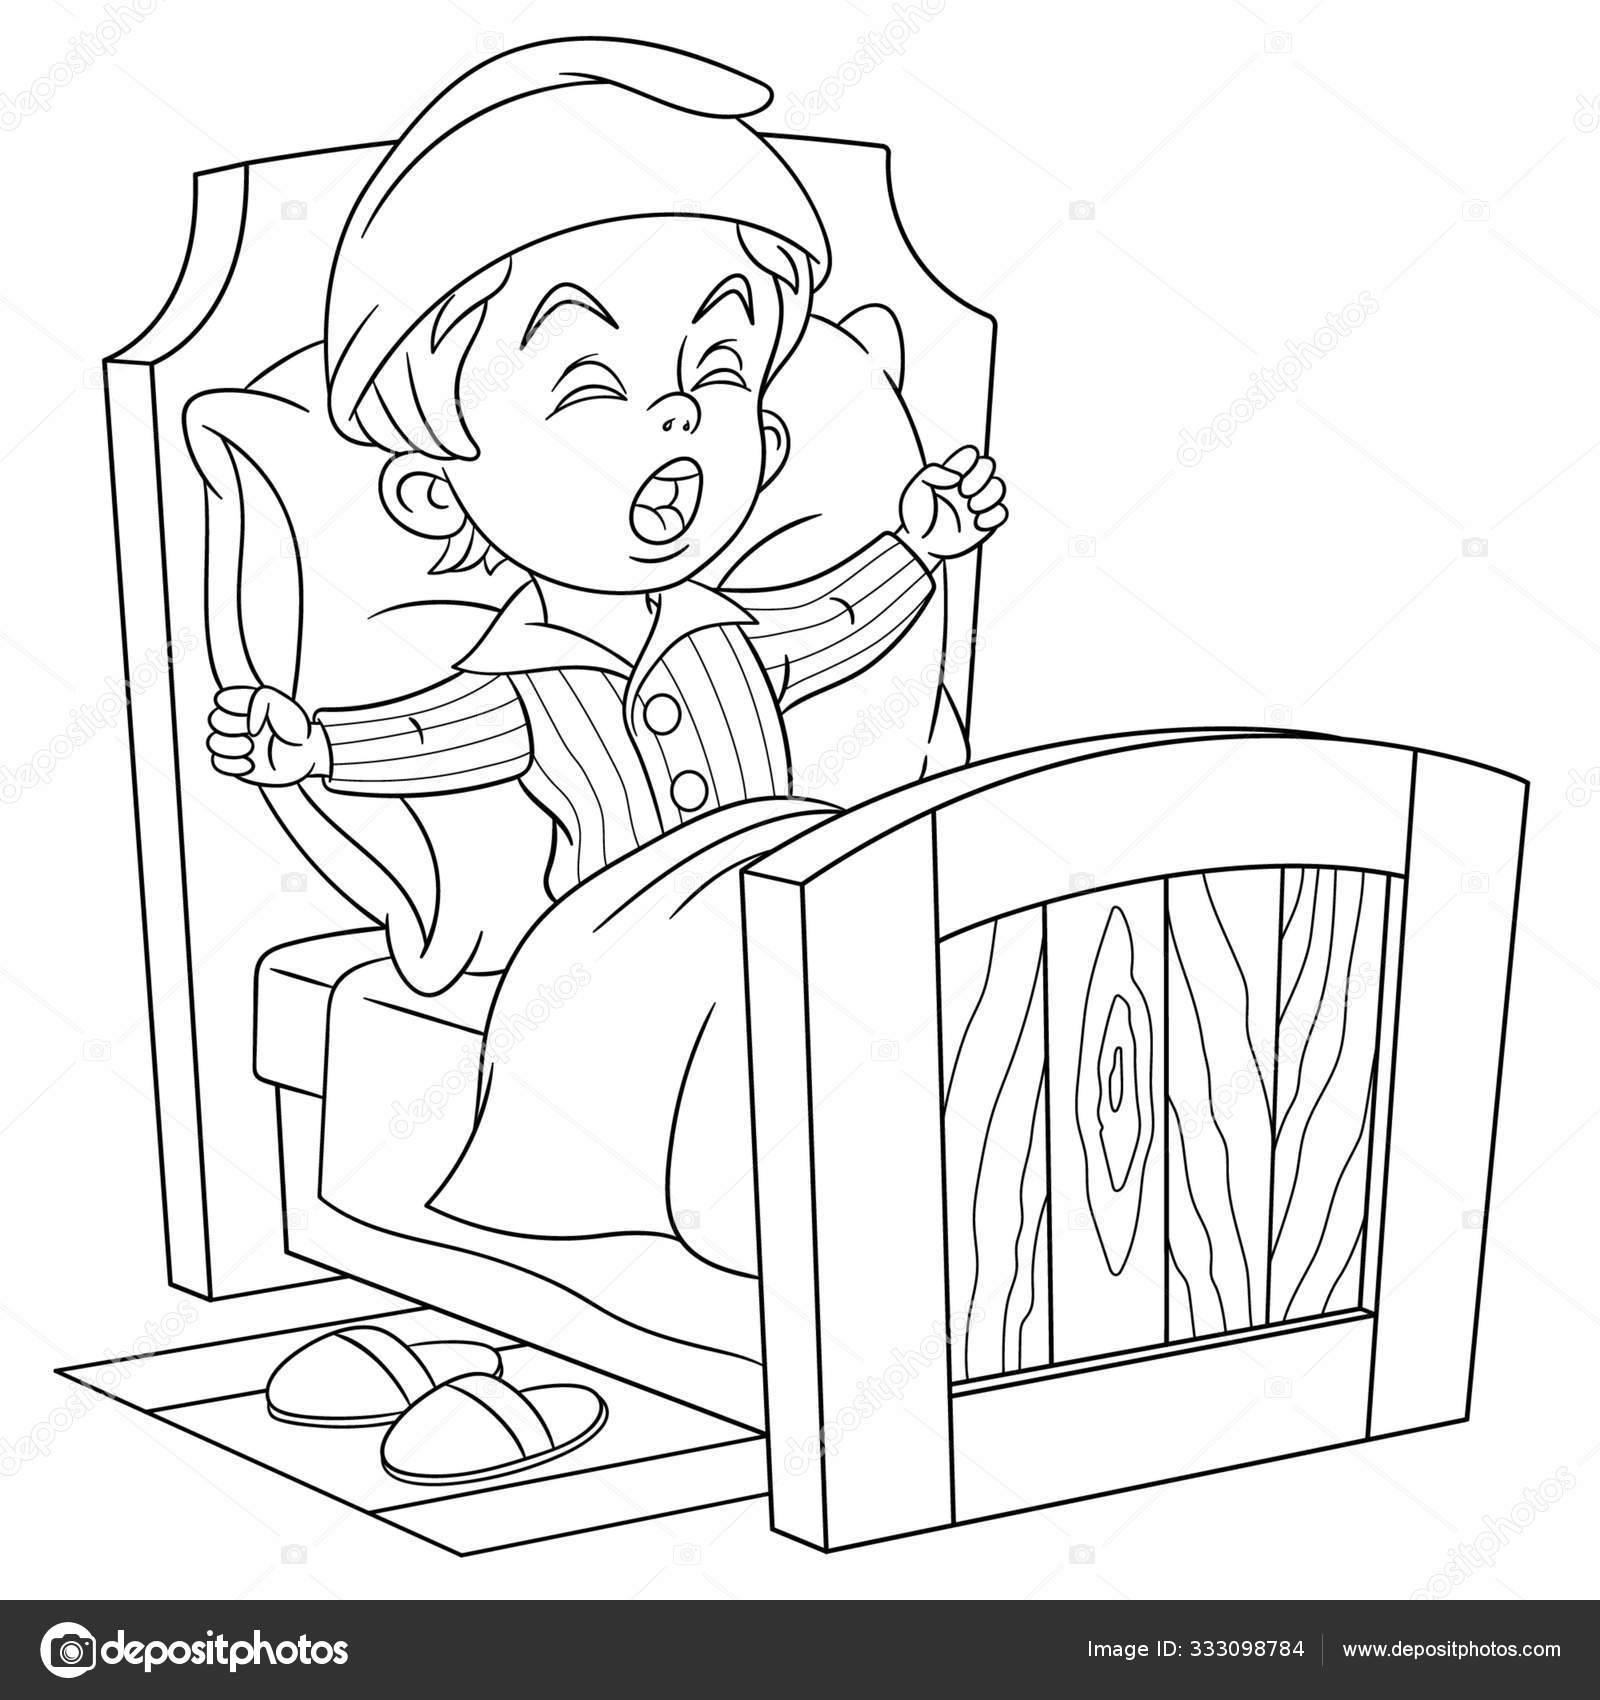 Coloring Page With Boy Sleeping In Bed Stock Vector Royalty Free Vector Image By C Sybirko 333098784